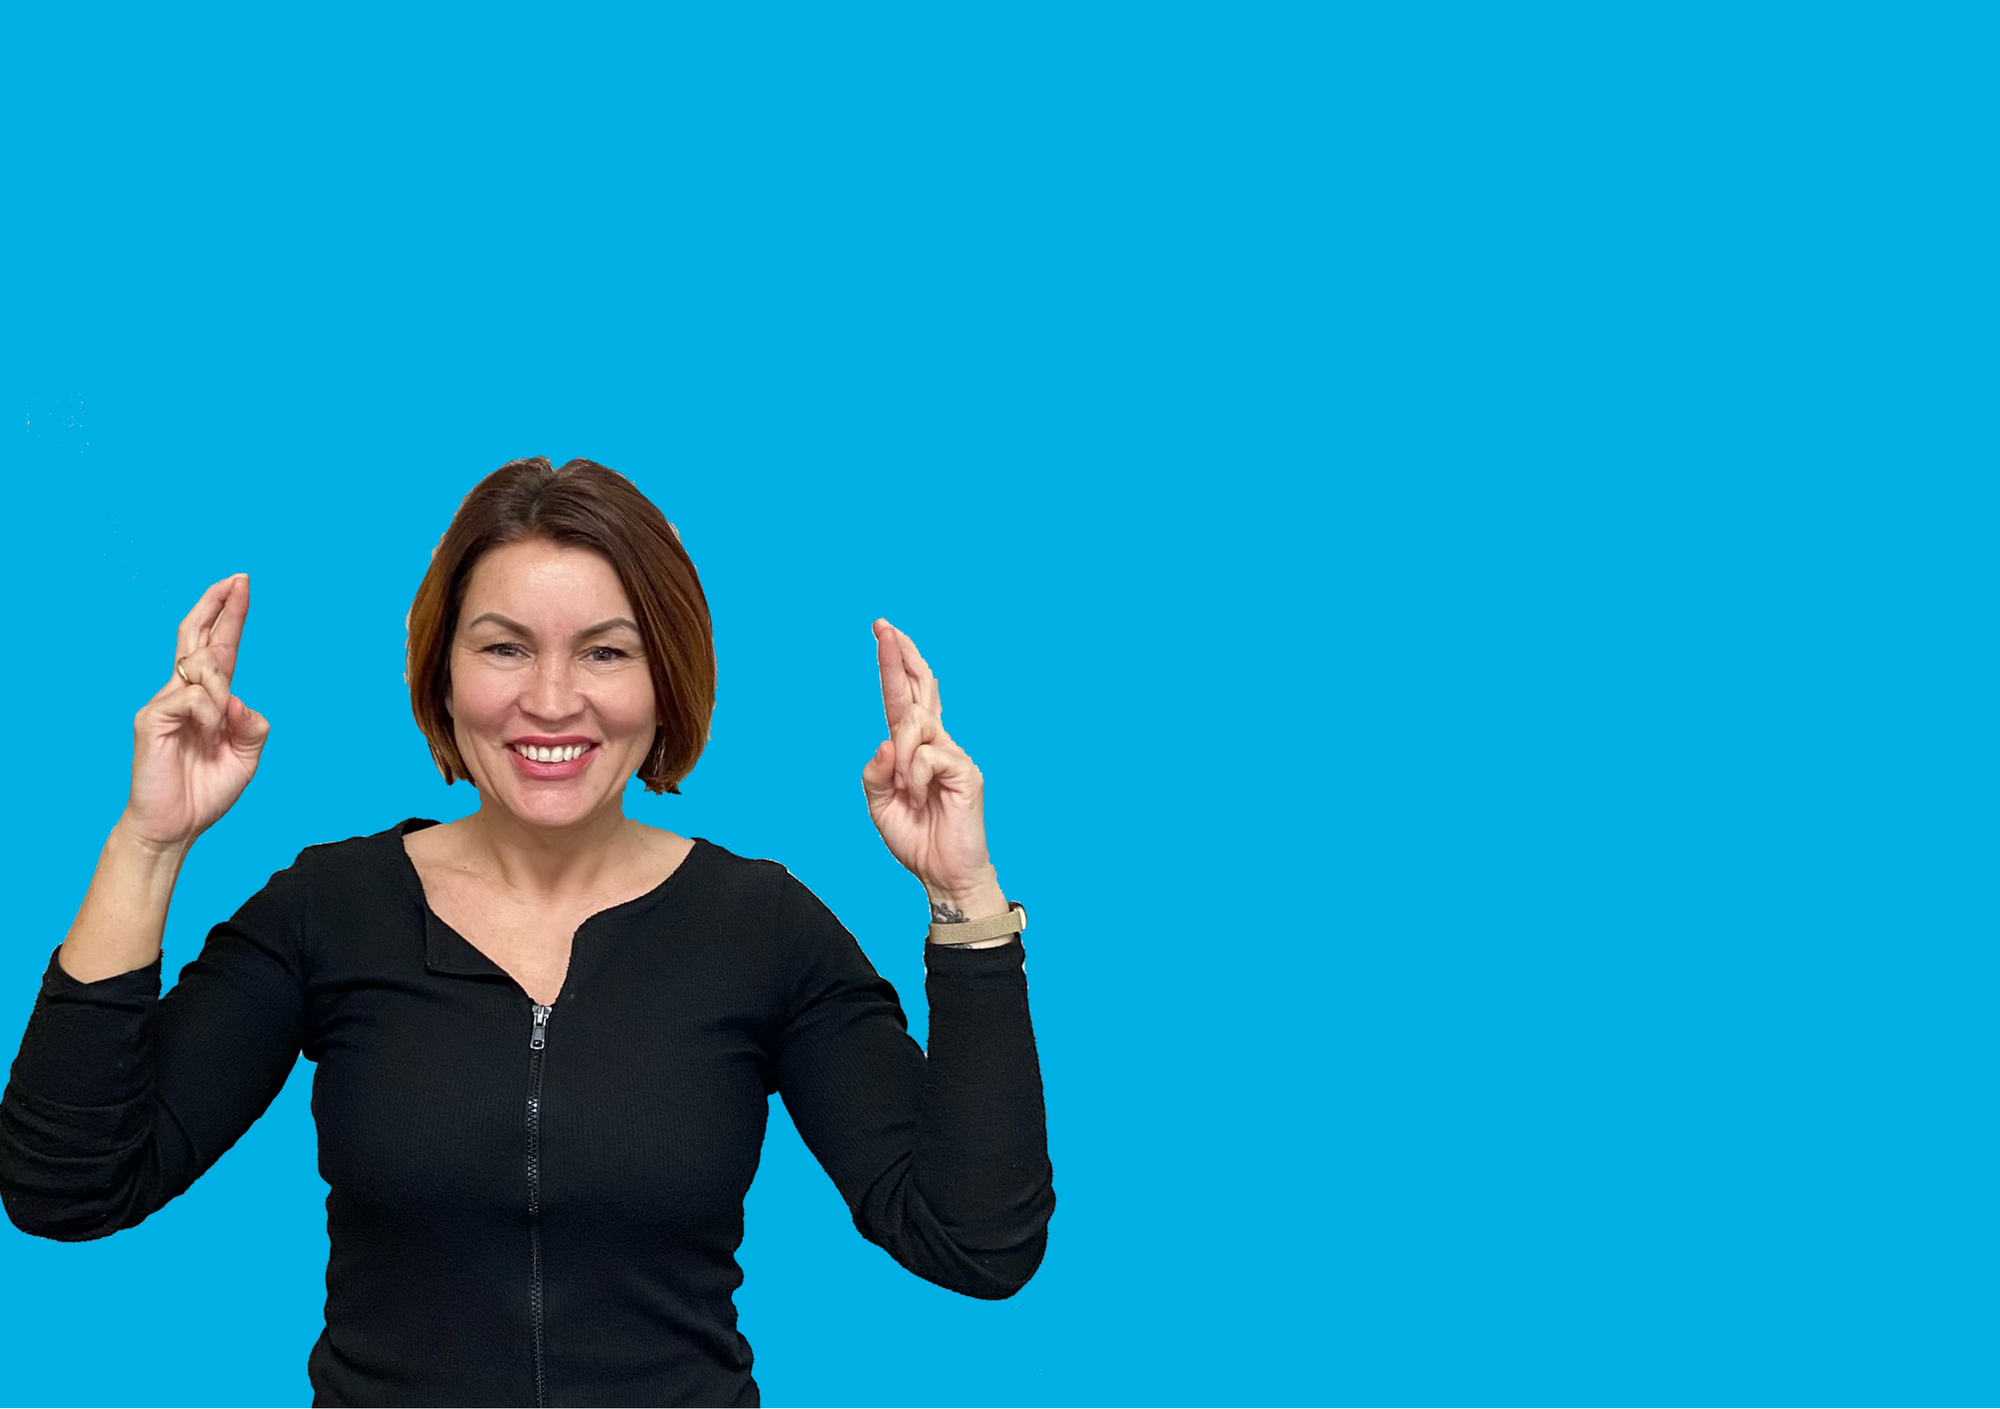 A woman with her fingers crossed on a light blue background